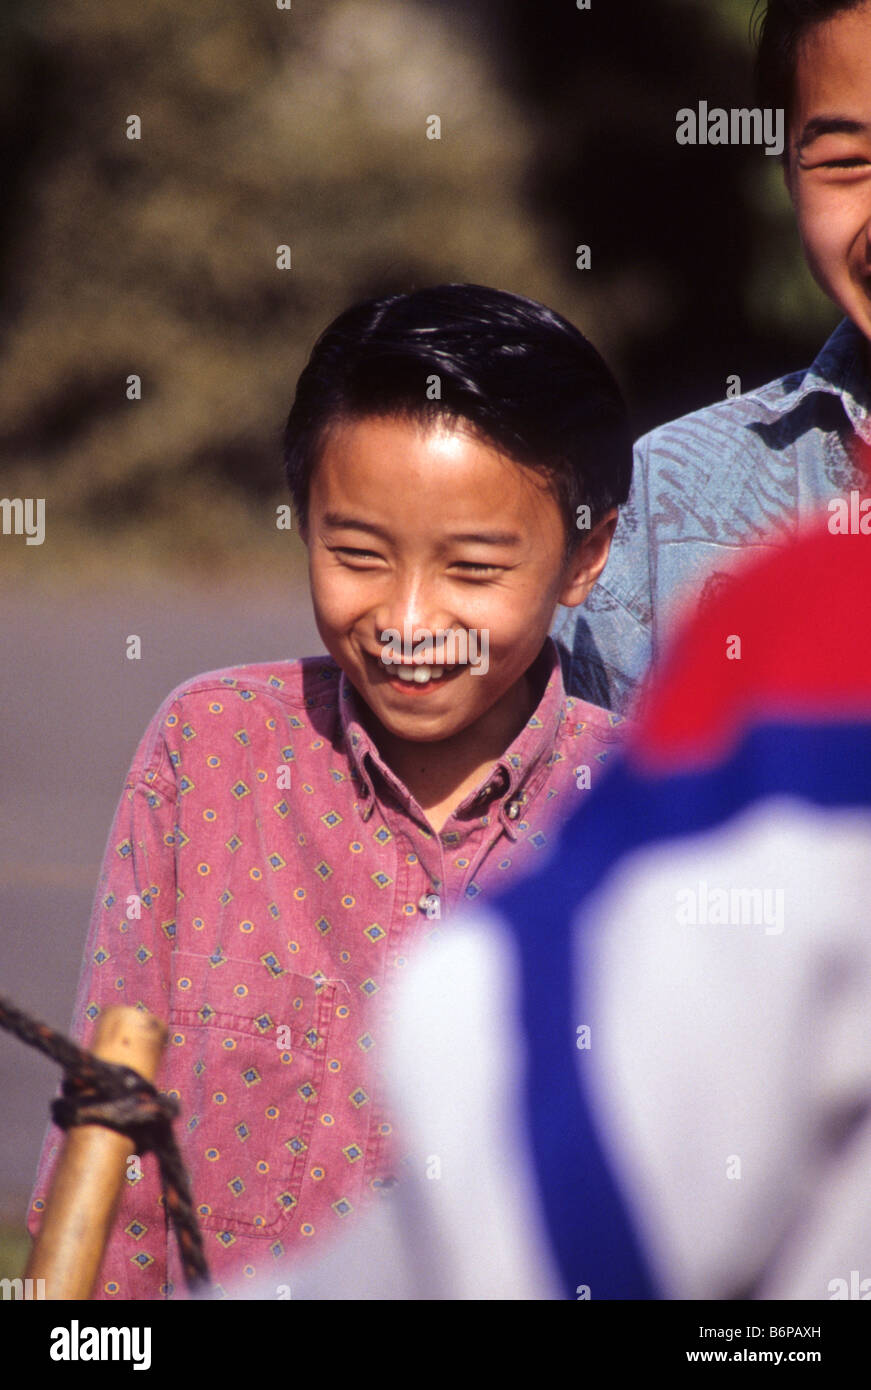 Asian-American boy smiles as he watches friend tie ropes in Boy Scout demonstration camp. Stock Photo